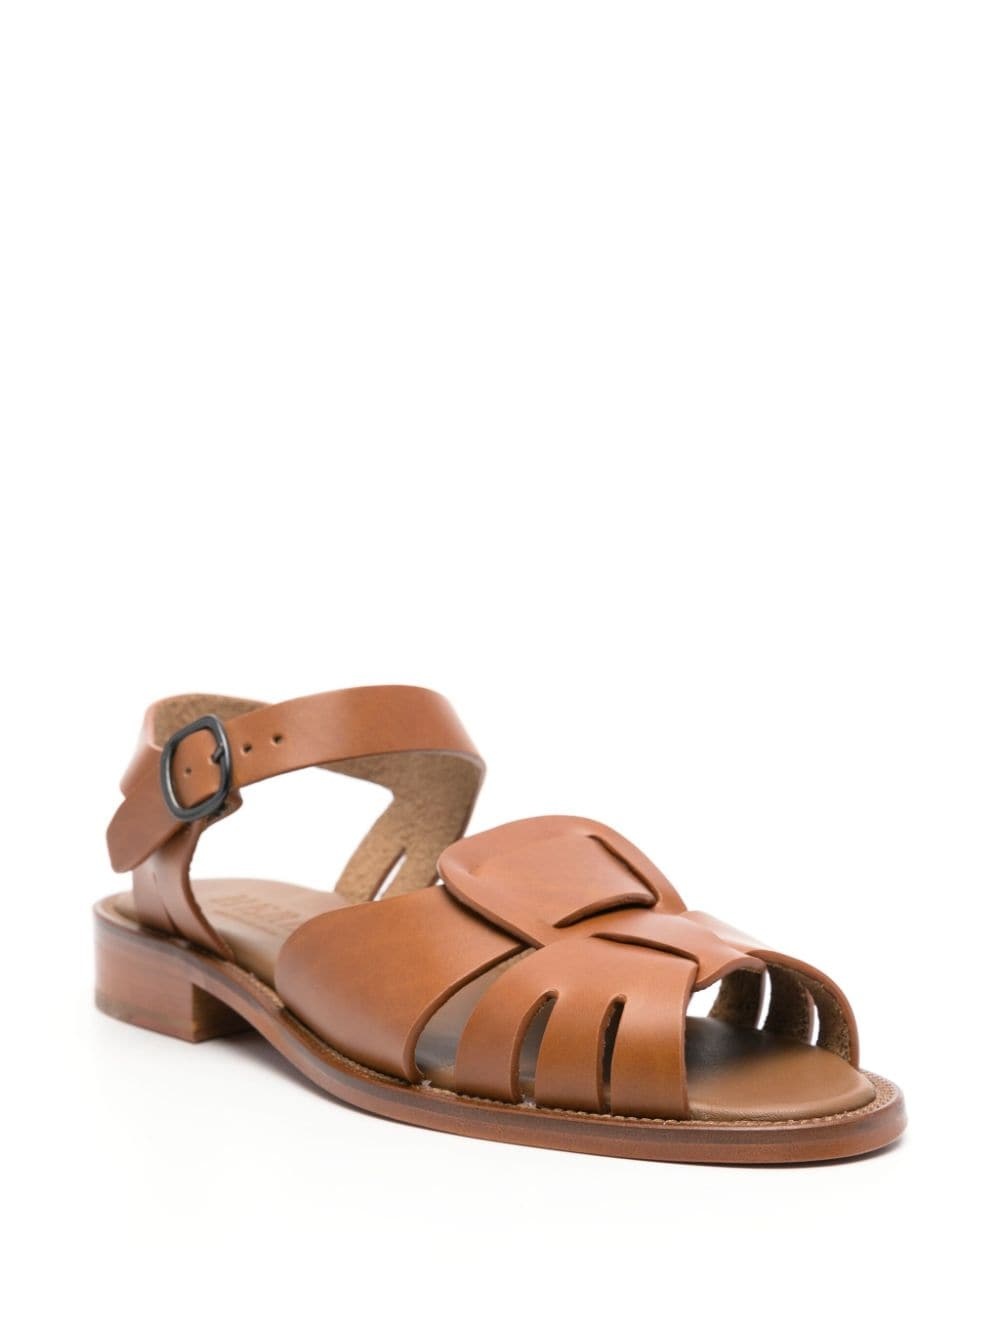 Ancora leather sandals - 2